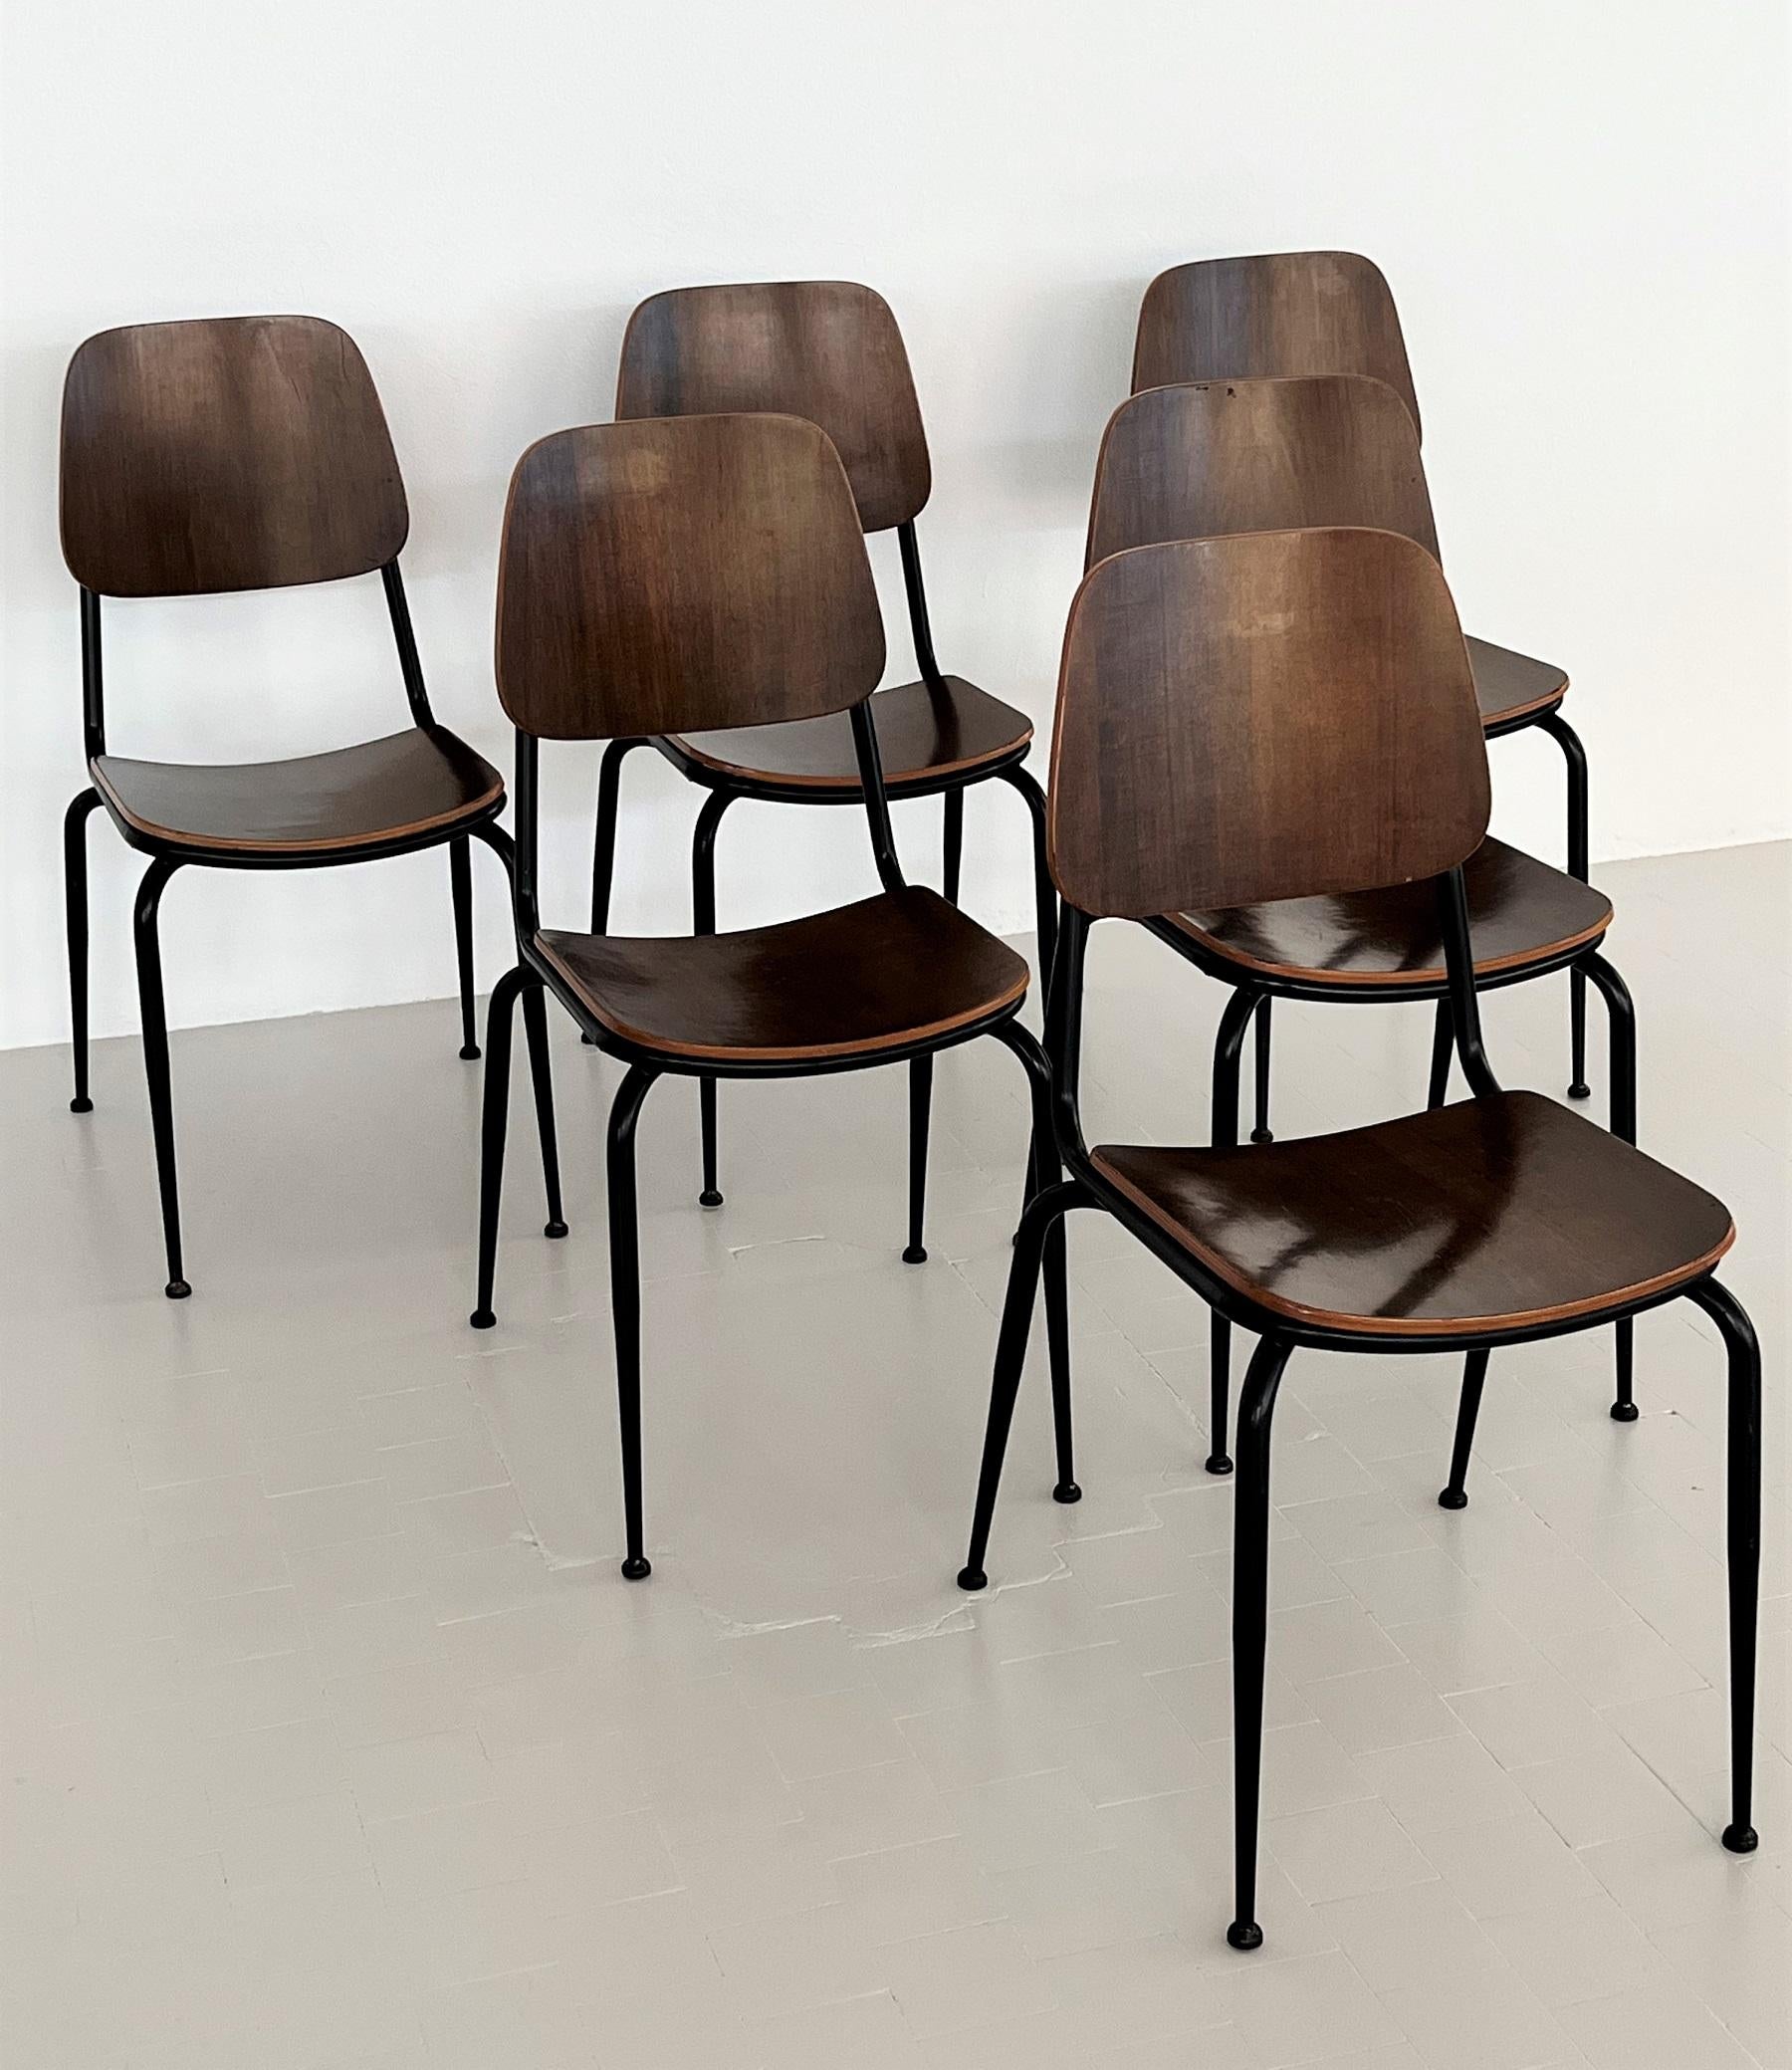 Italian Mid-Century Plywood Nutwood Chairs by Velca Legnano, 1960s For Sale 11